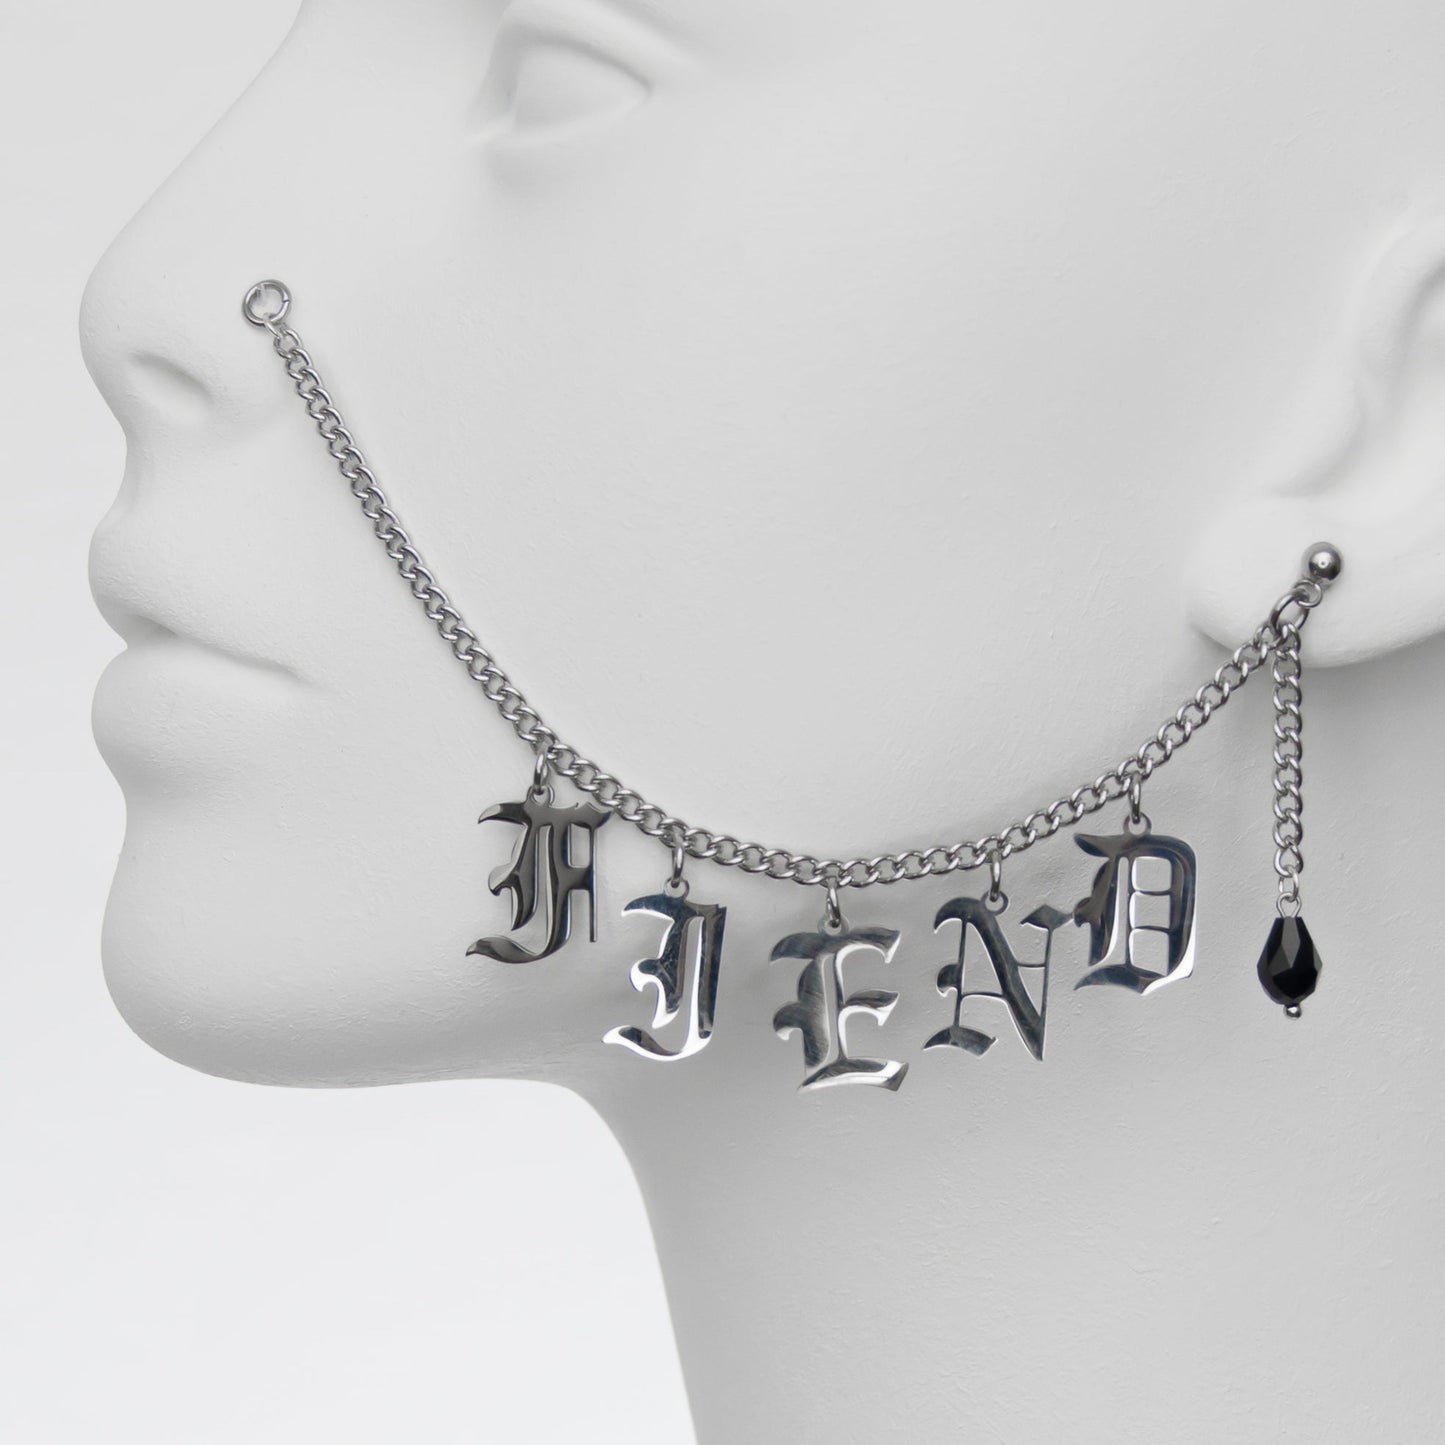 Nose to ear chain.  Face jewerly with Gothic lettering with black crystal earring.